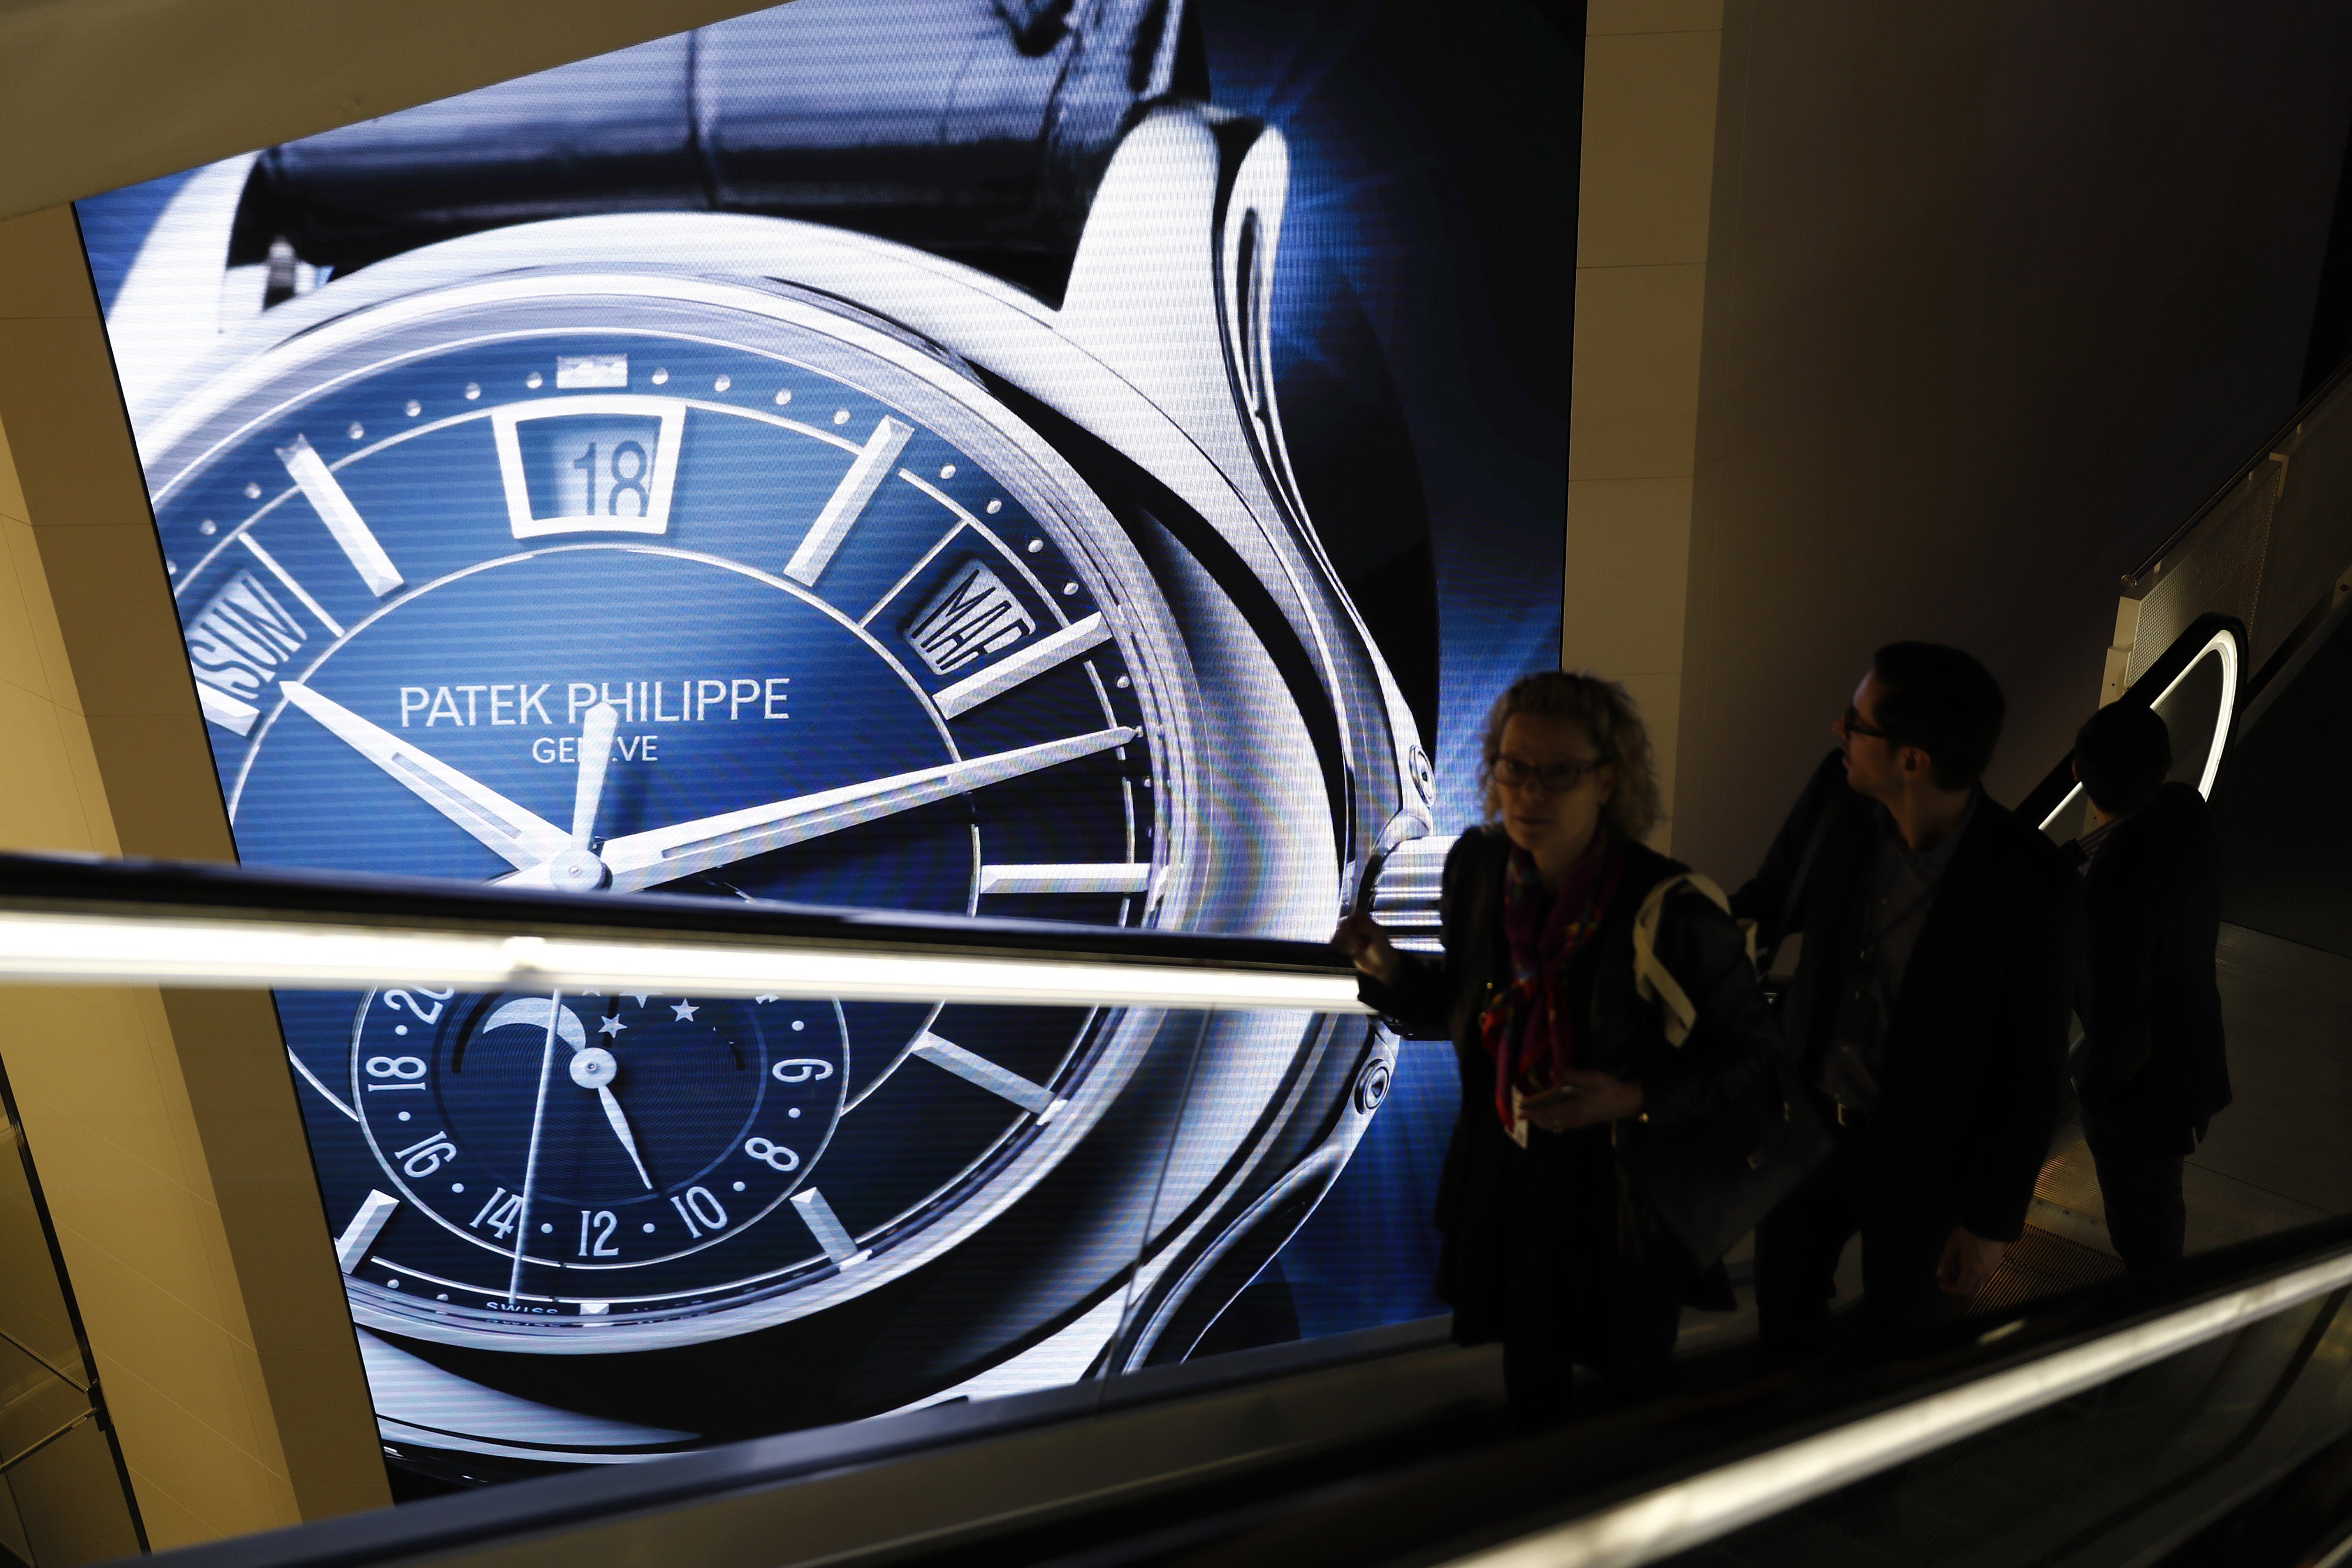 An advertising display for the Patek Philippe SA luxury wristwatch at the Baselworld trade show